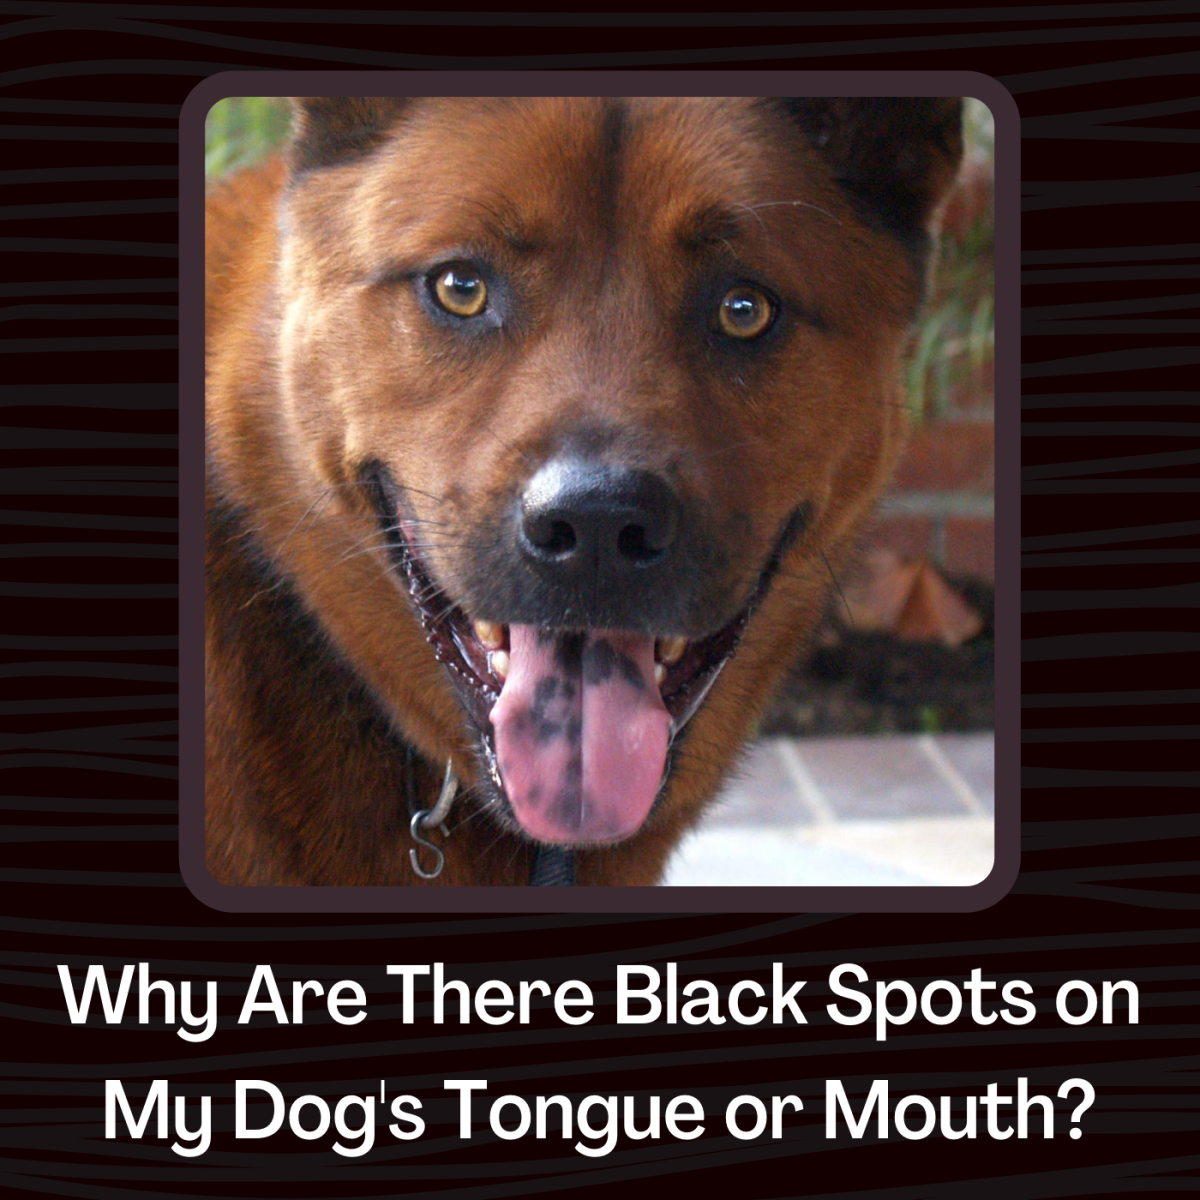 Why Do Dogs Have Black Coloring on Their Tongues or Mouths? - PetHelpful